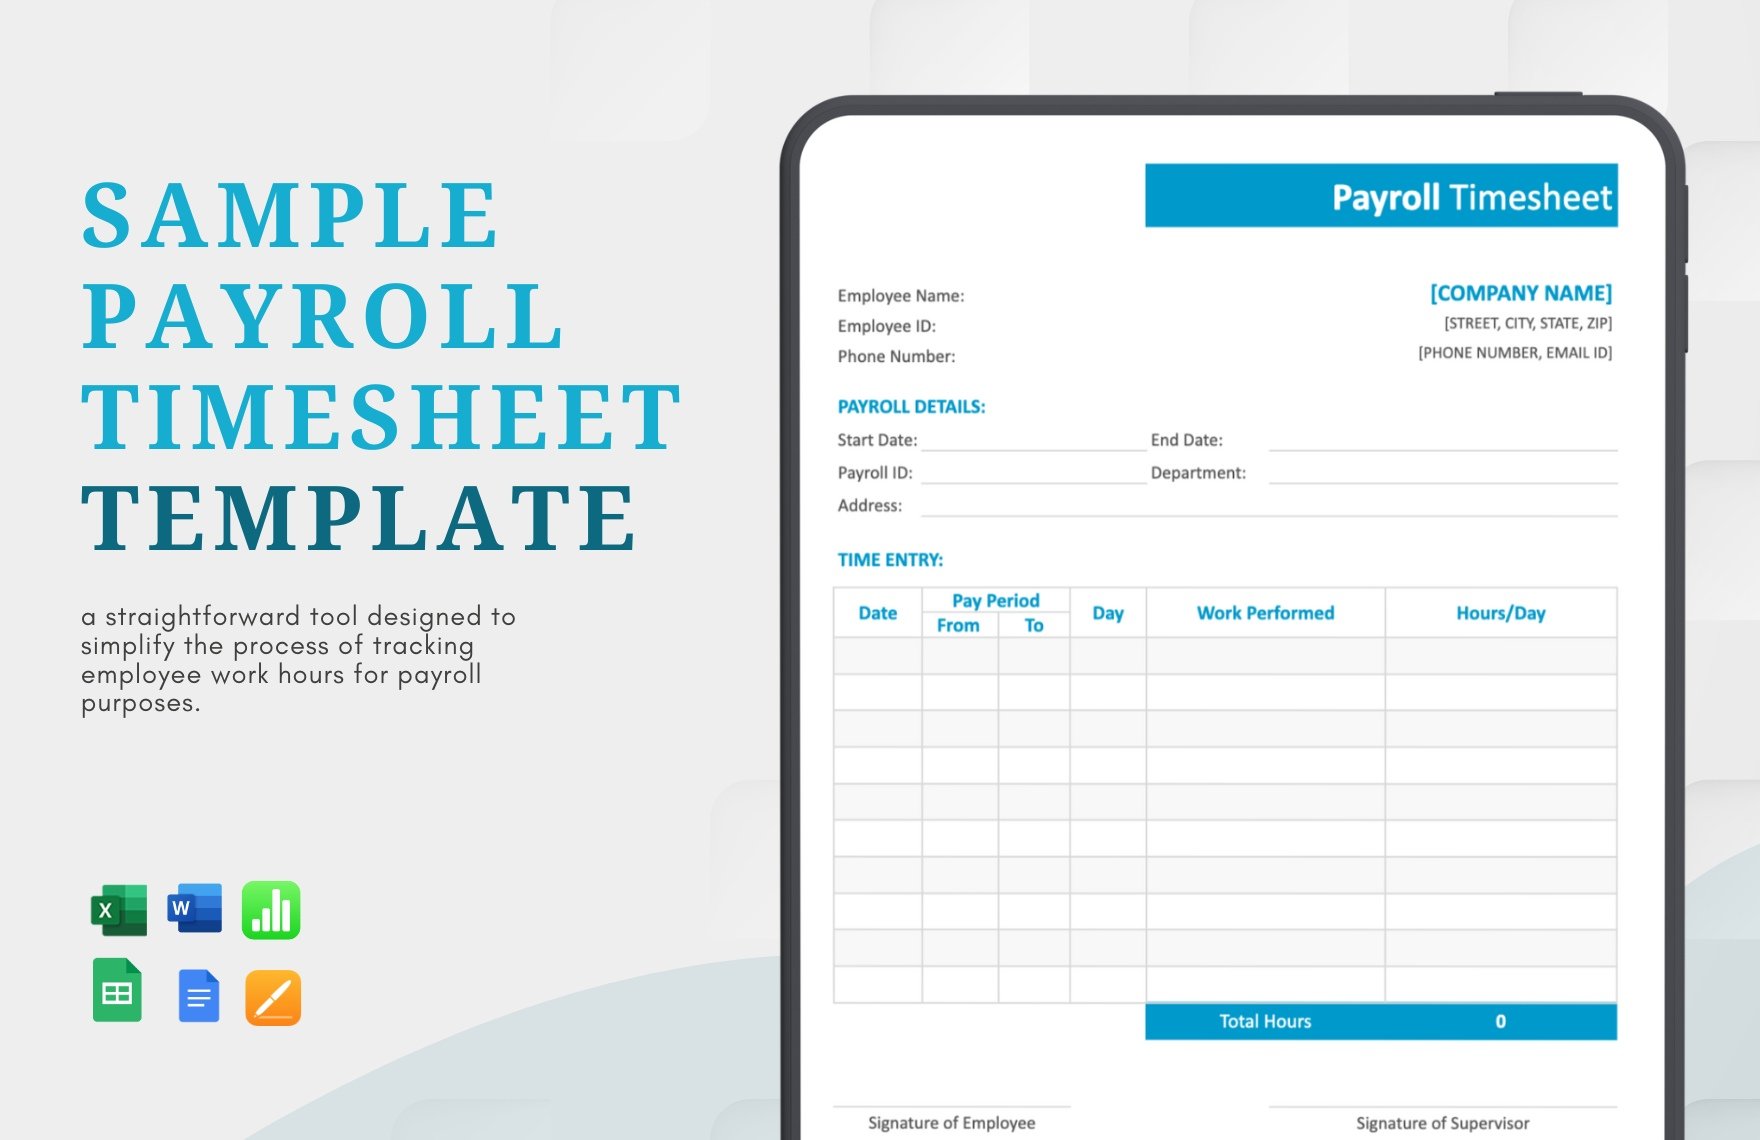 Sample Payroll Timesheet Template in Word, Google Docs, Excel, Google Sheets, Apple Pages, Apple Numbers